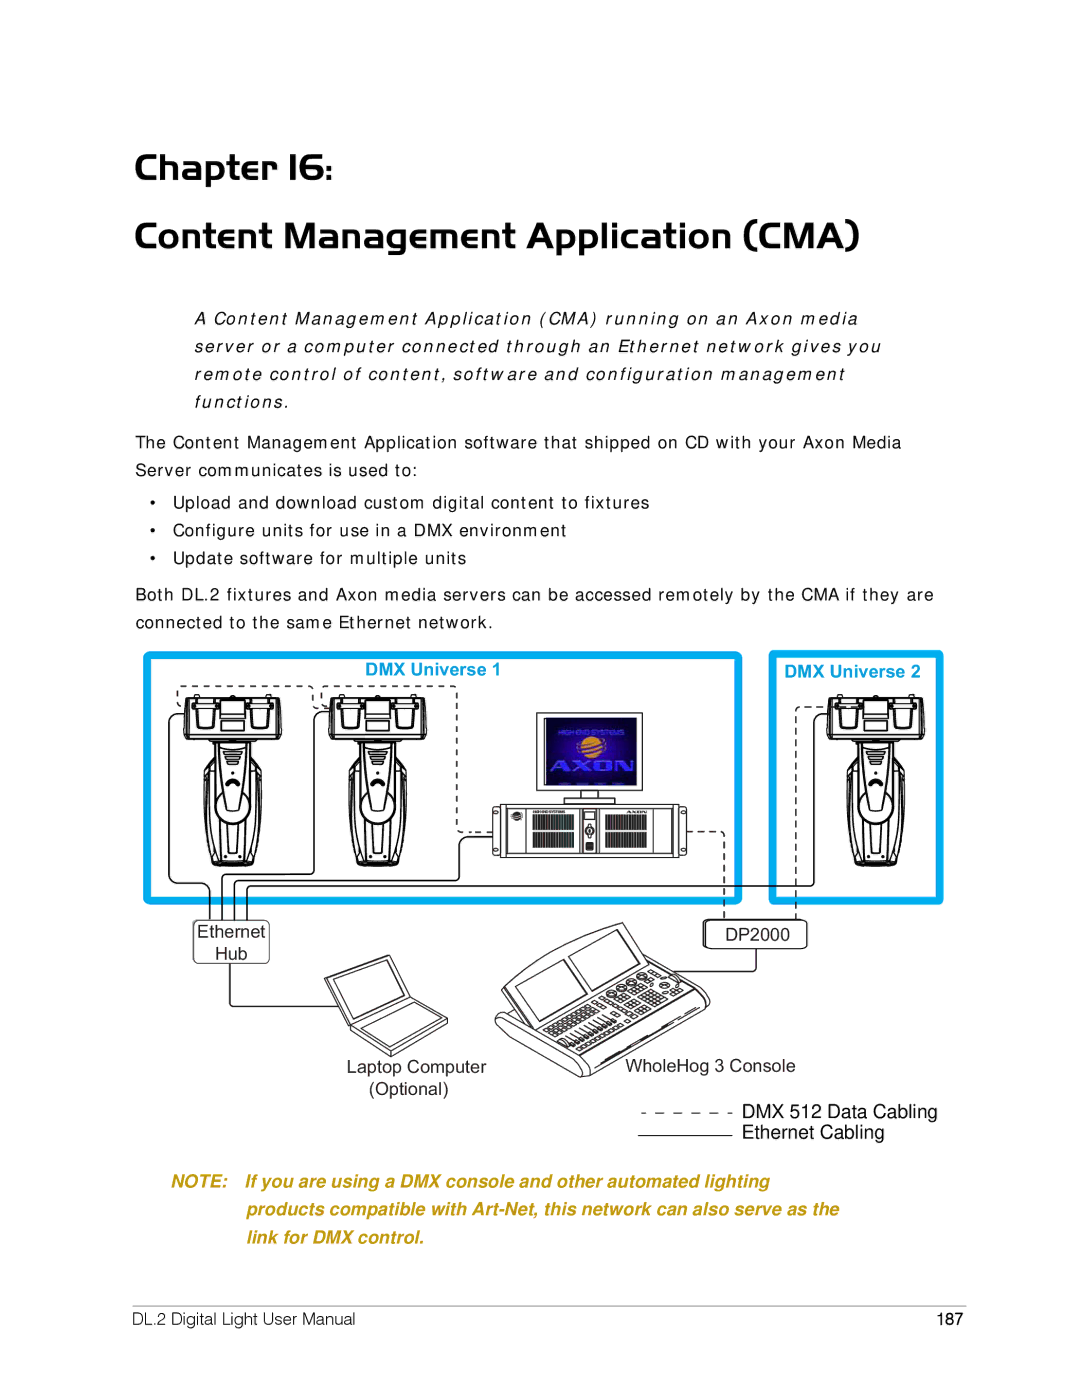 High End Systems DL.2 user manual Chapter Content Management Application CMA, 187 